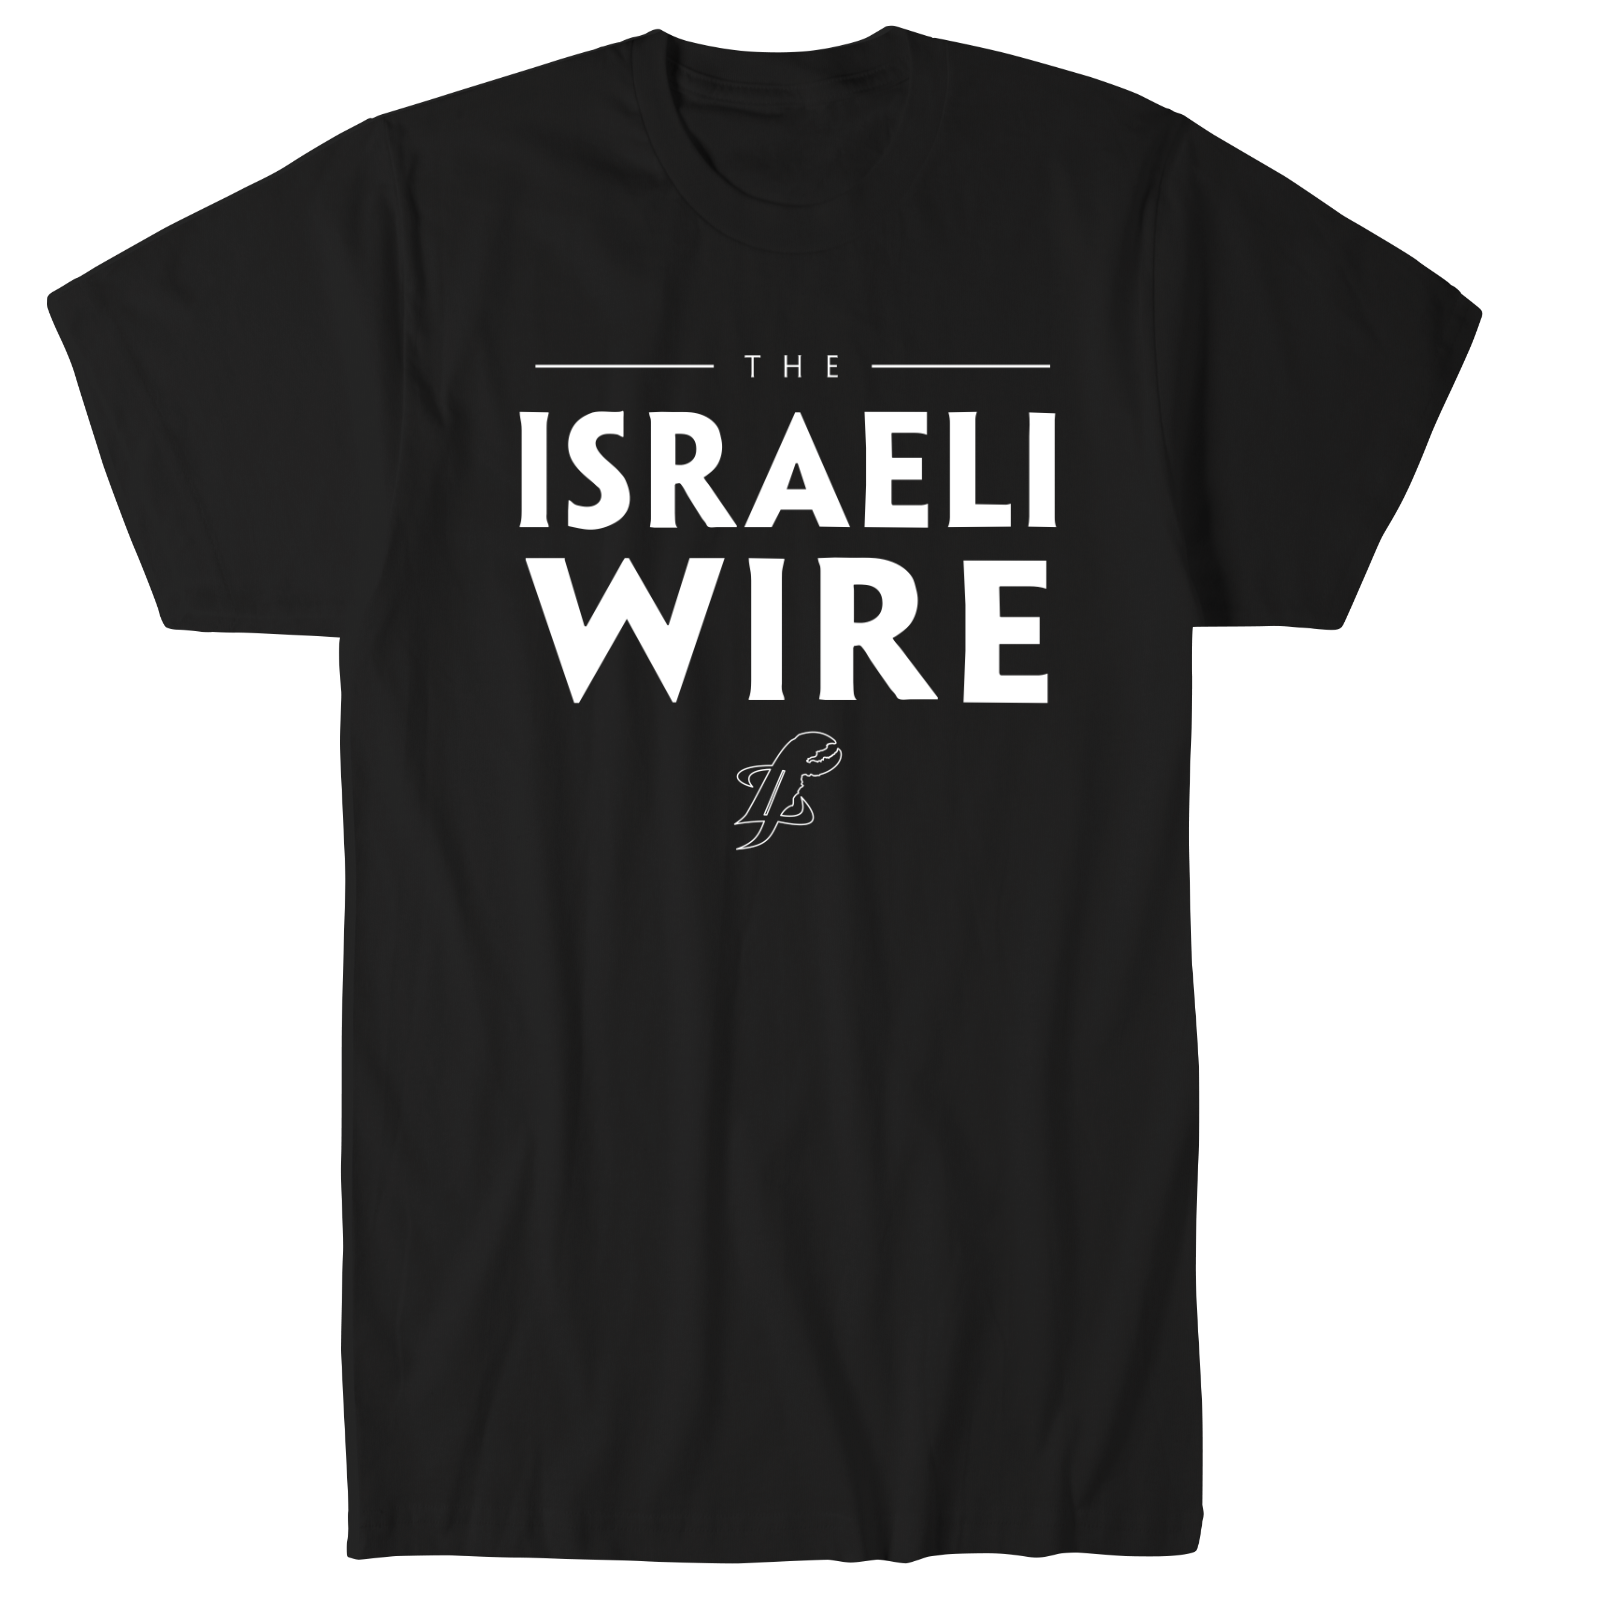 The Israeli Wire T-Shirt